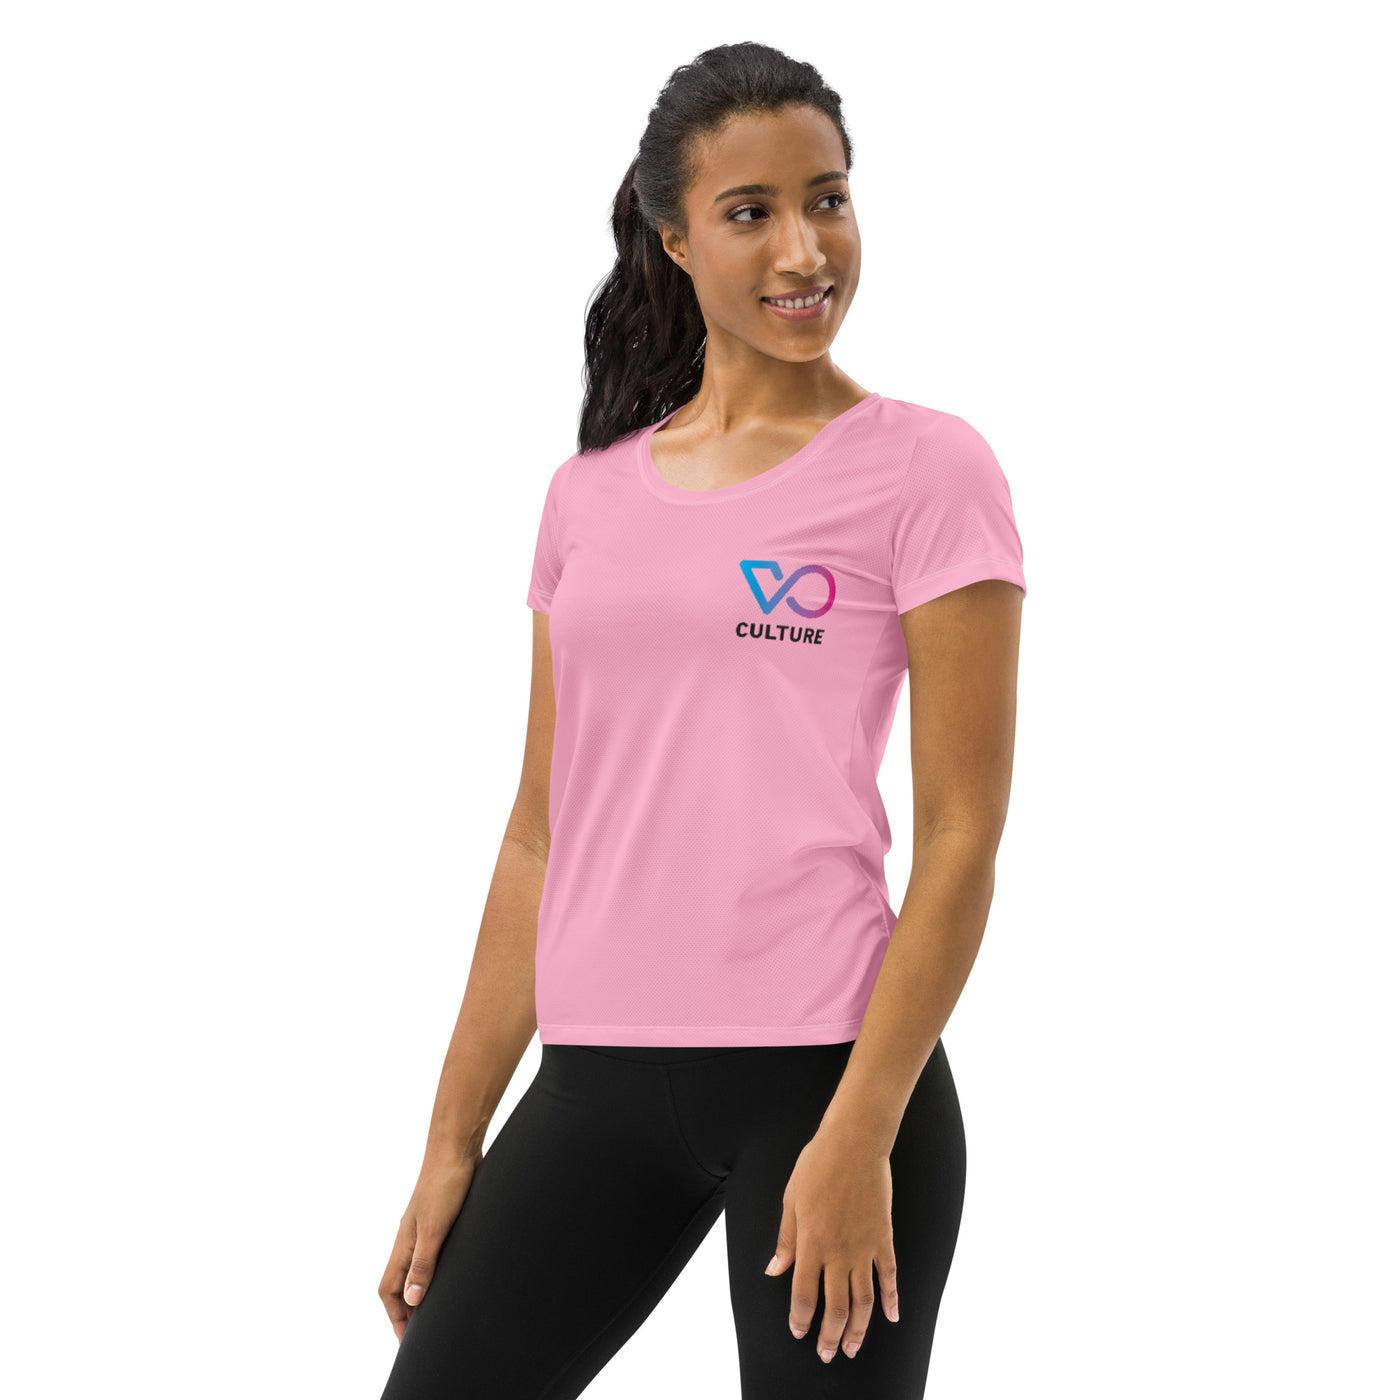 WORK YOUR PLAN Women's Athletic T-shirt